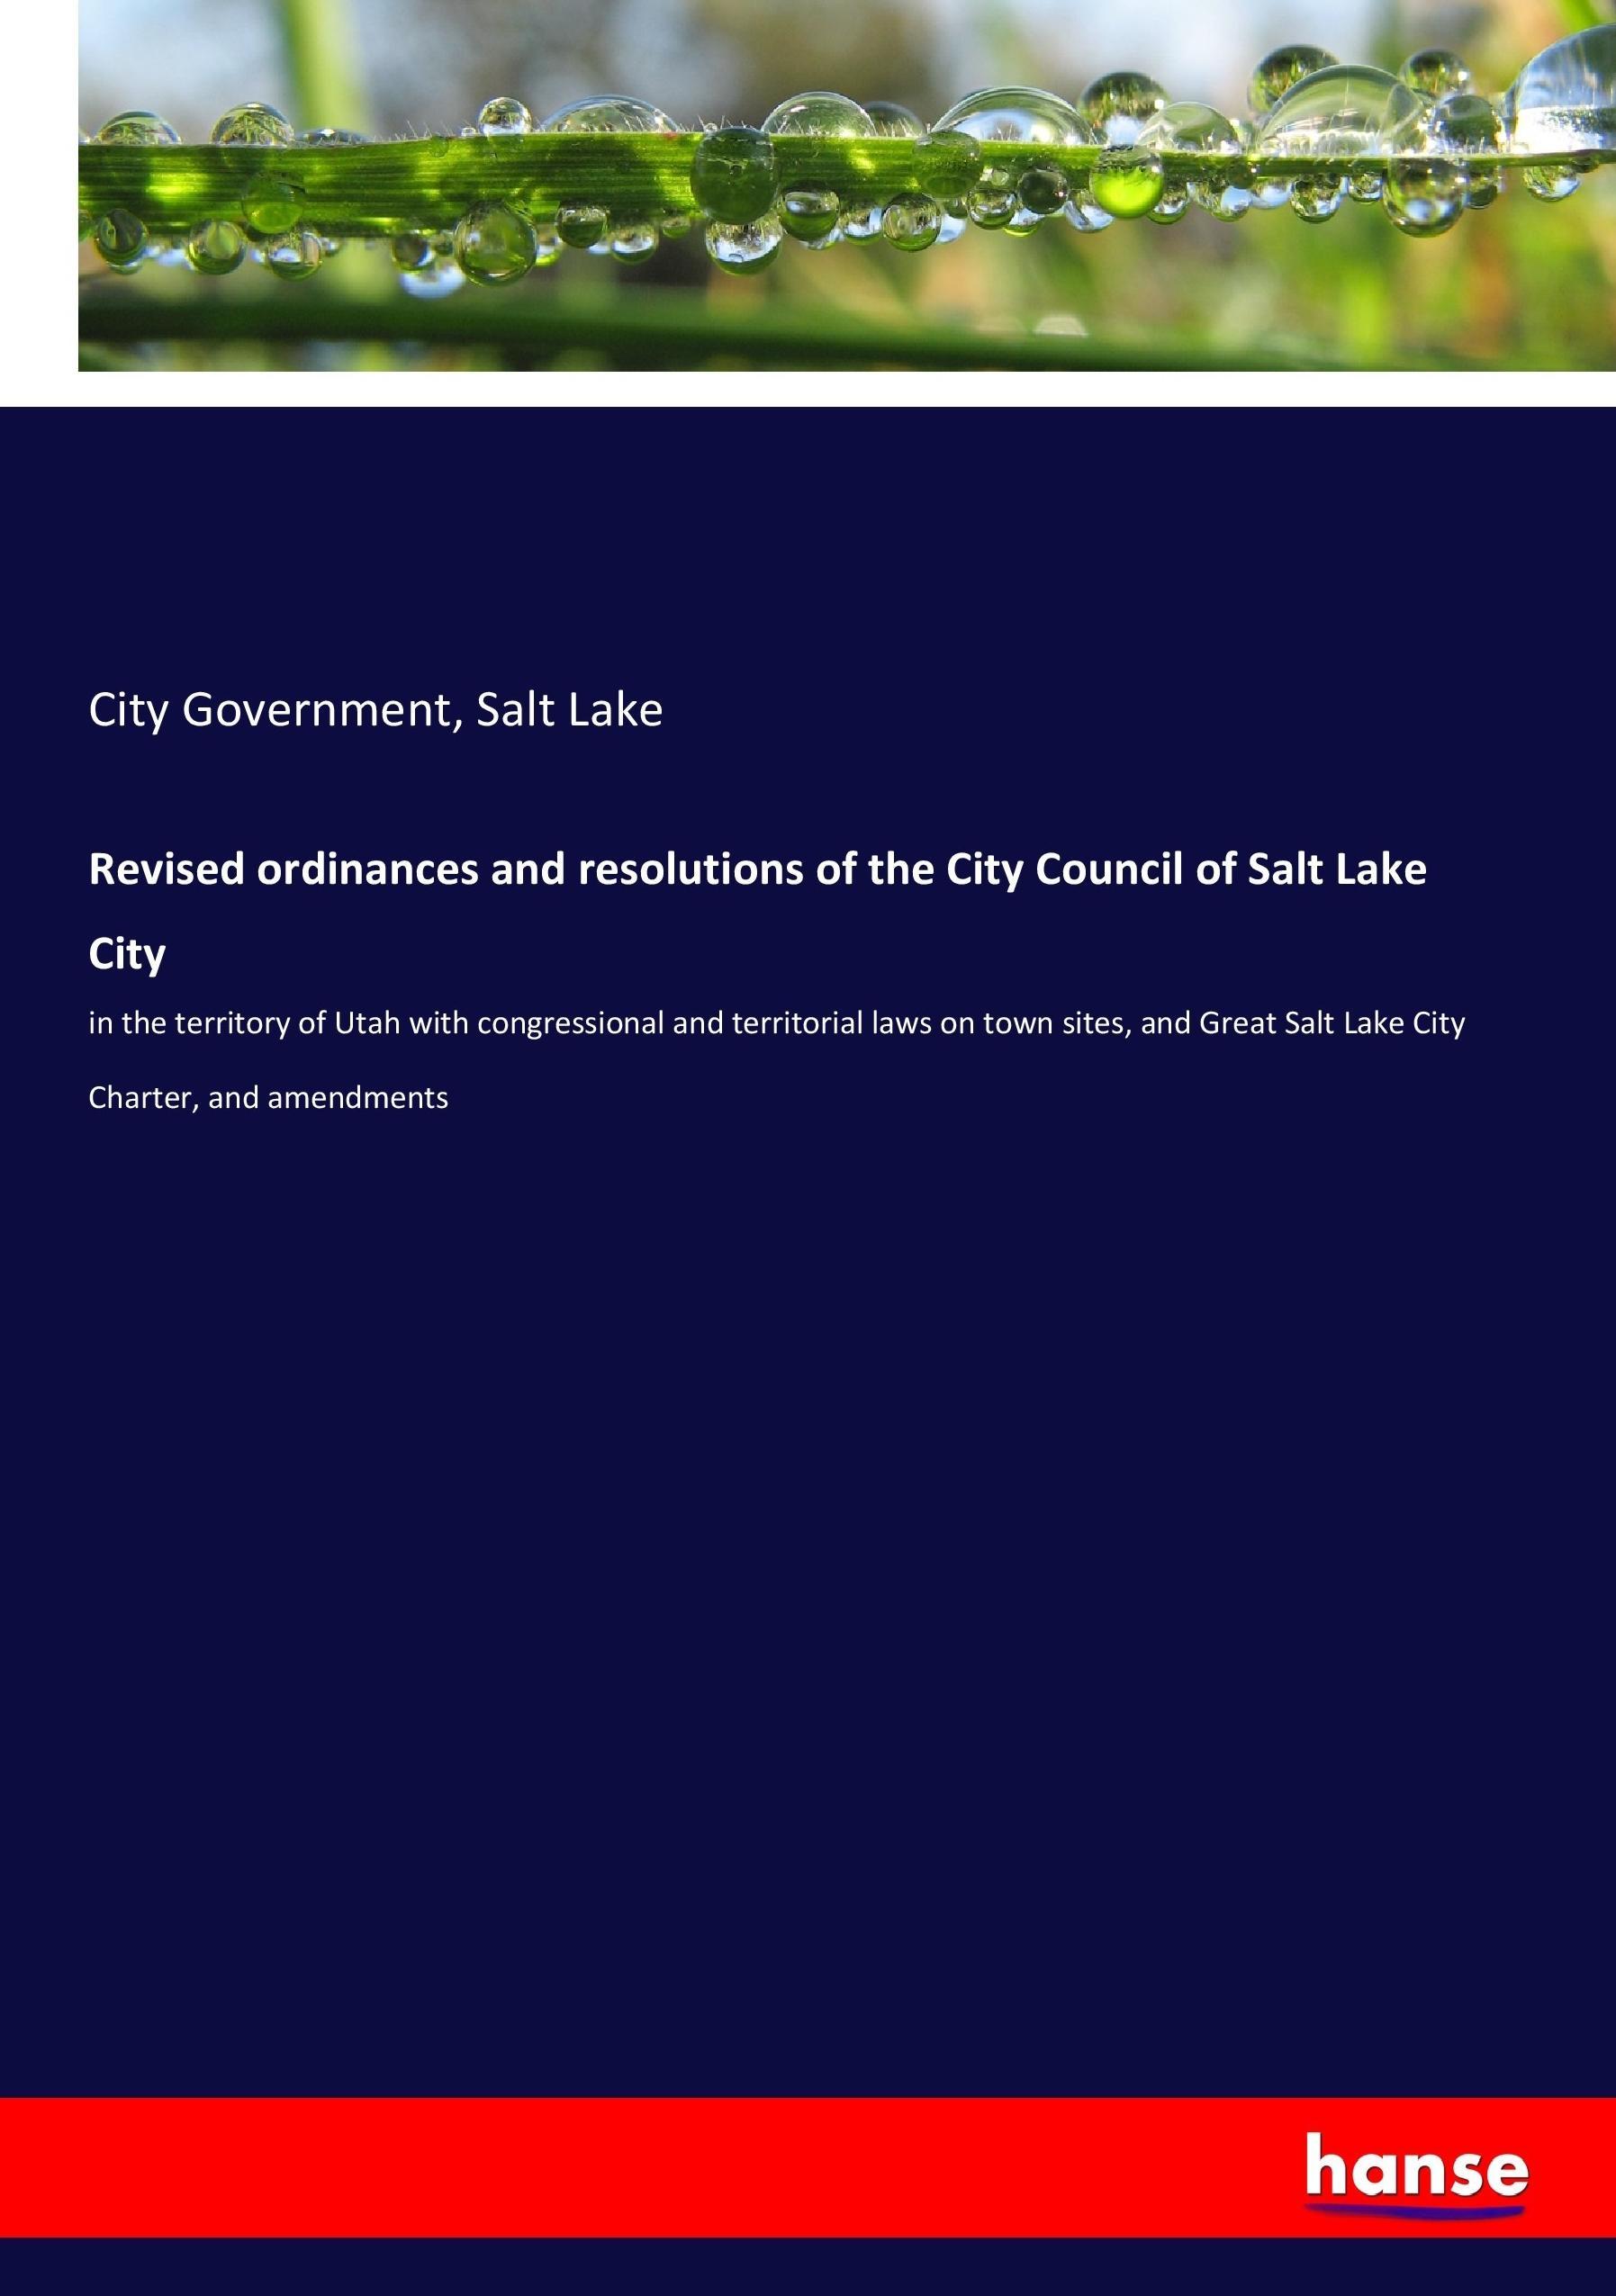 Revised ordinances and resolutions of the City Council of Salt Lake City - Salt Lake, City Government